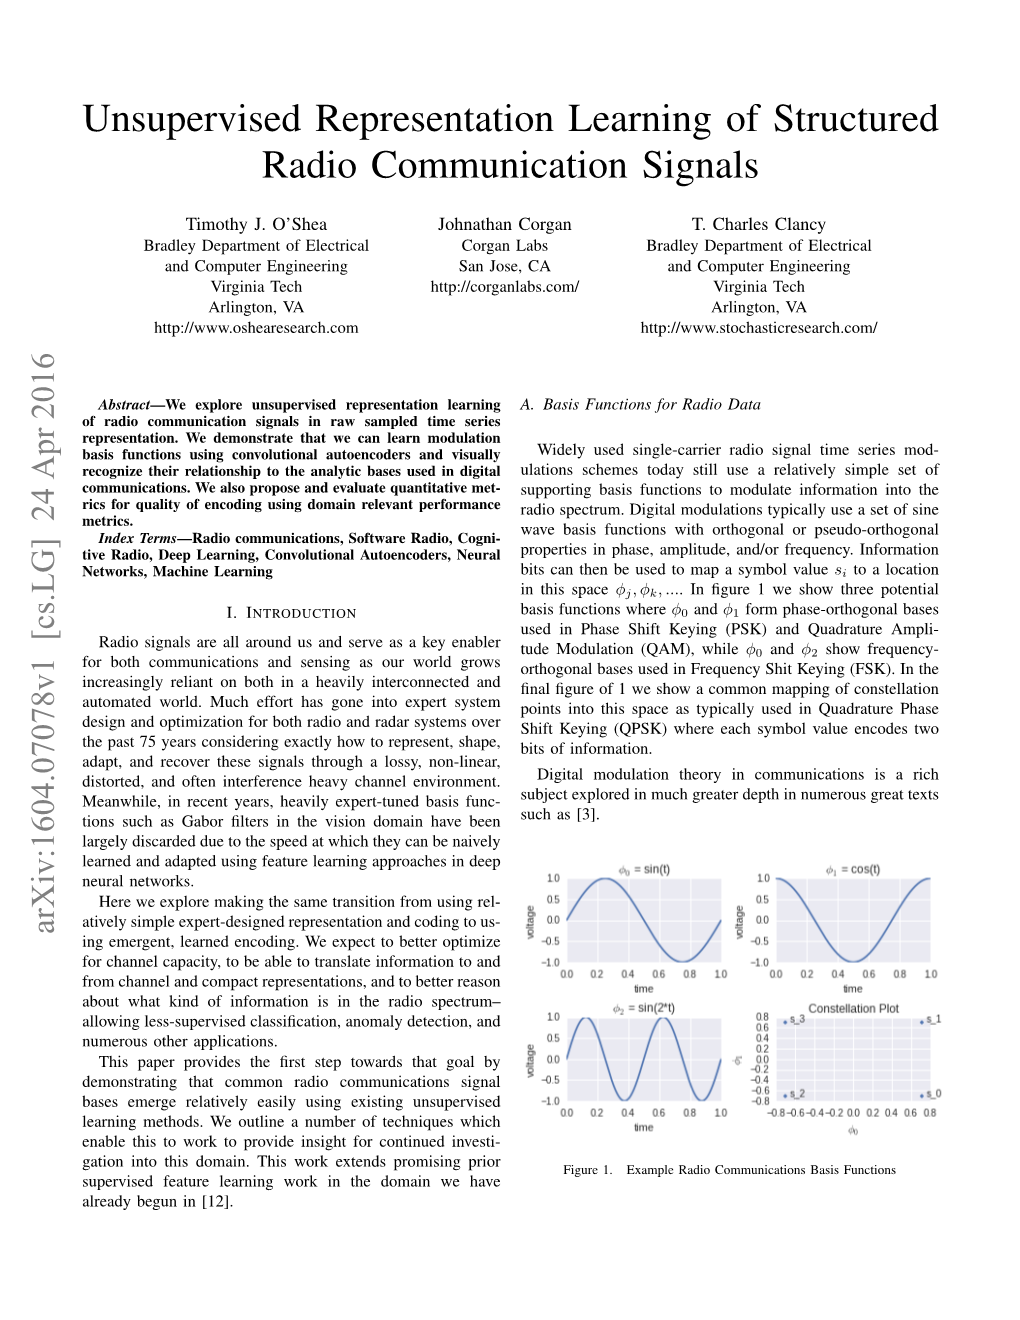 Unsupervised Representation Learning of Structured Radio Communication Signals